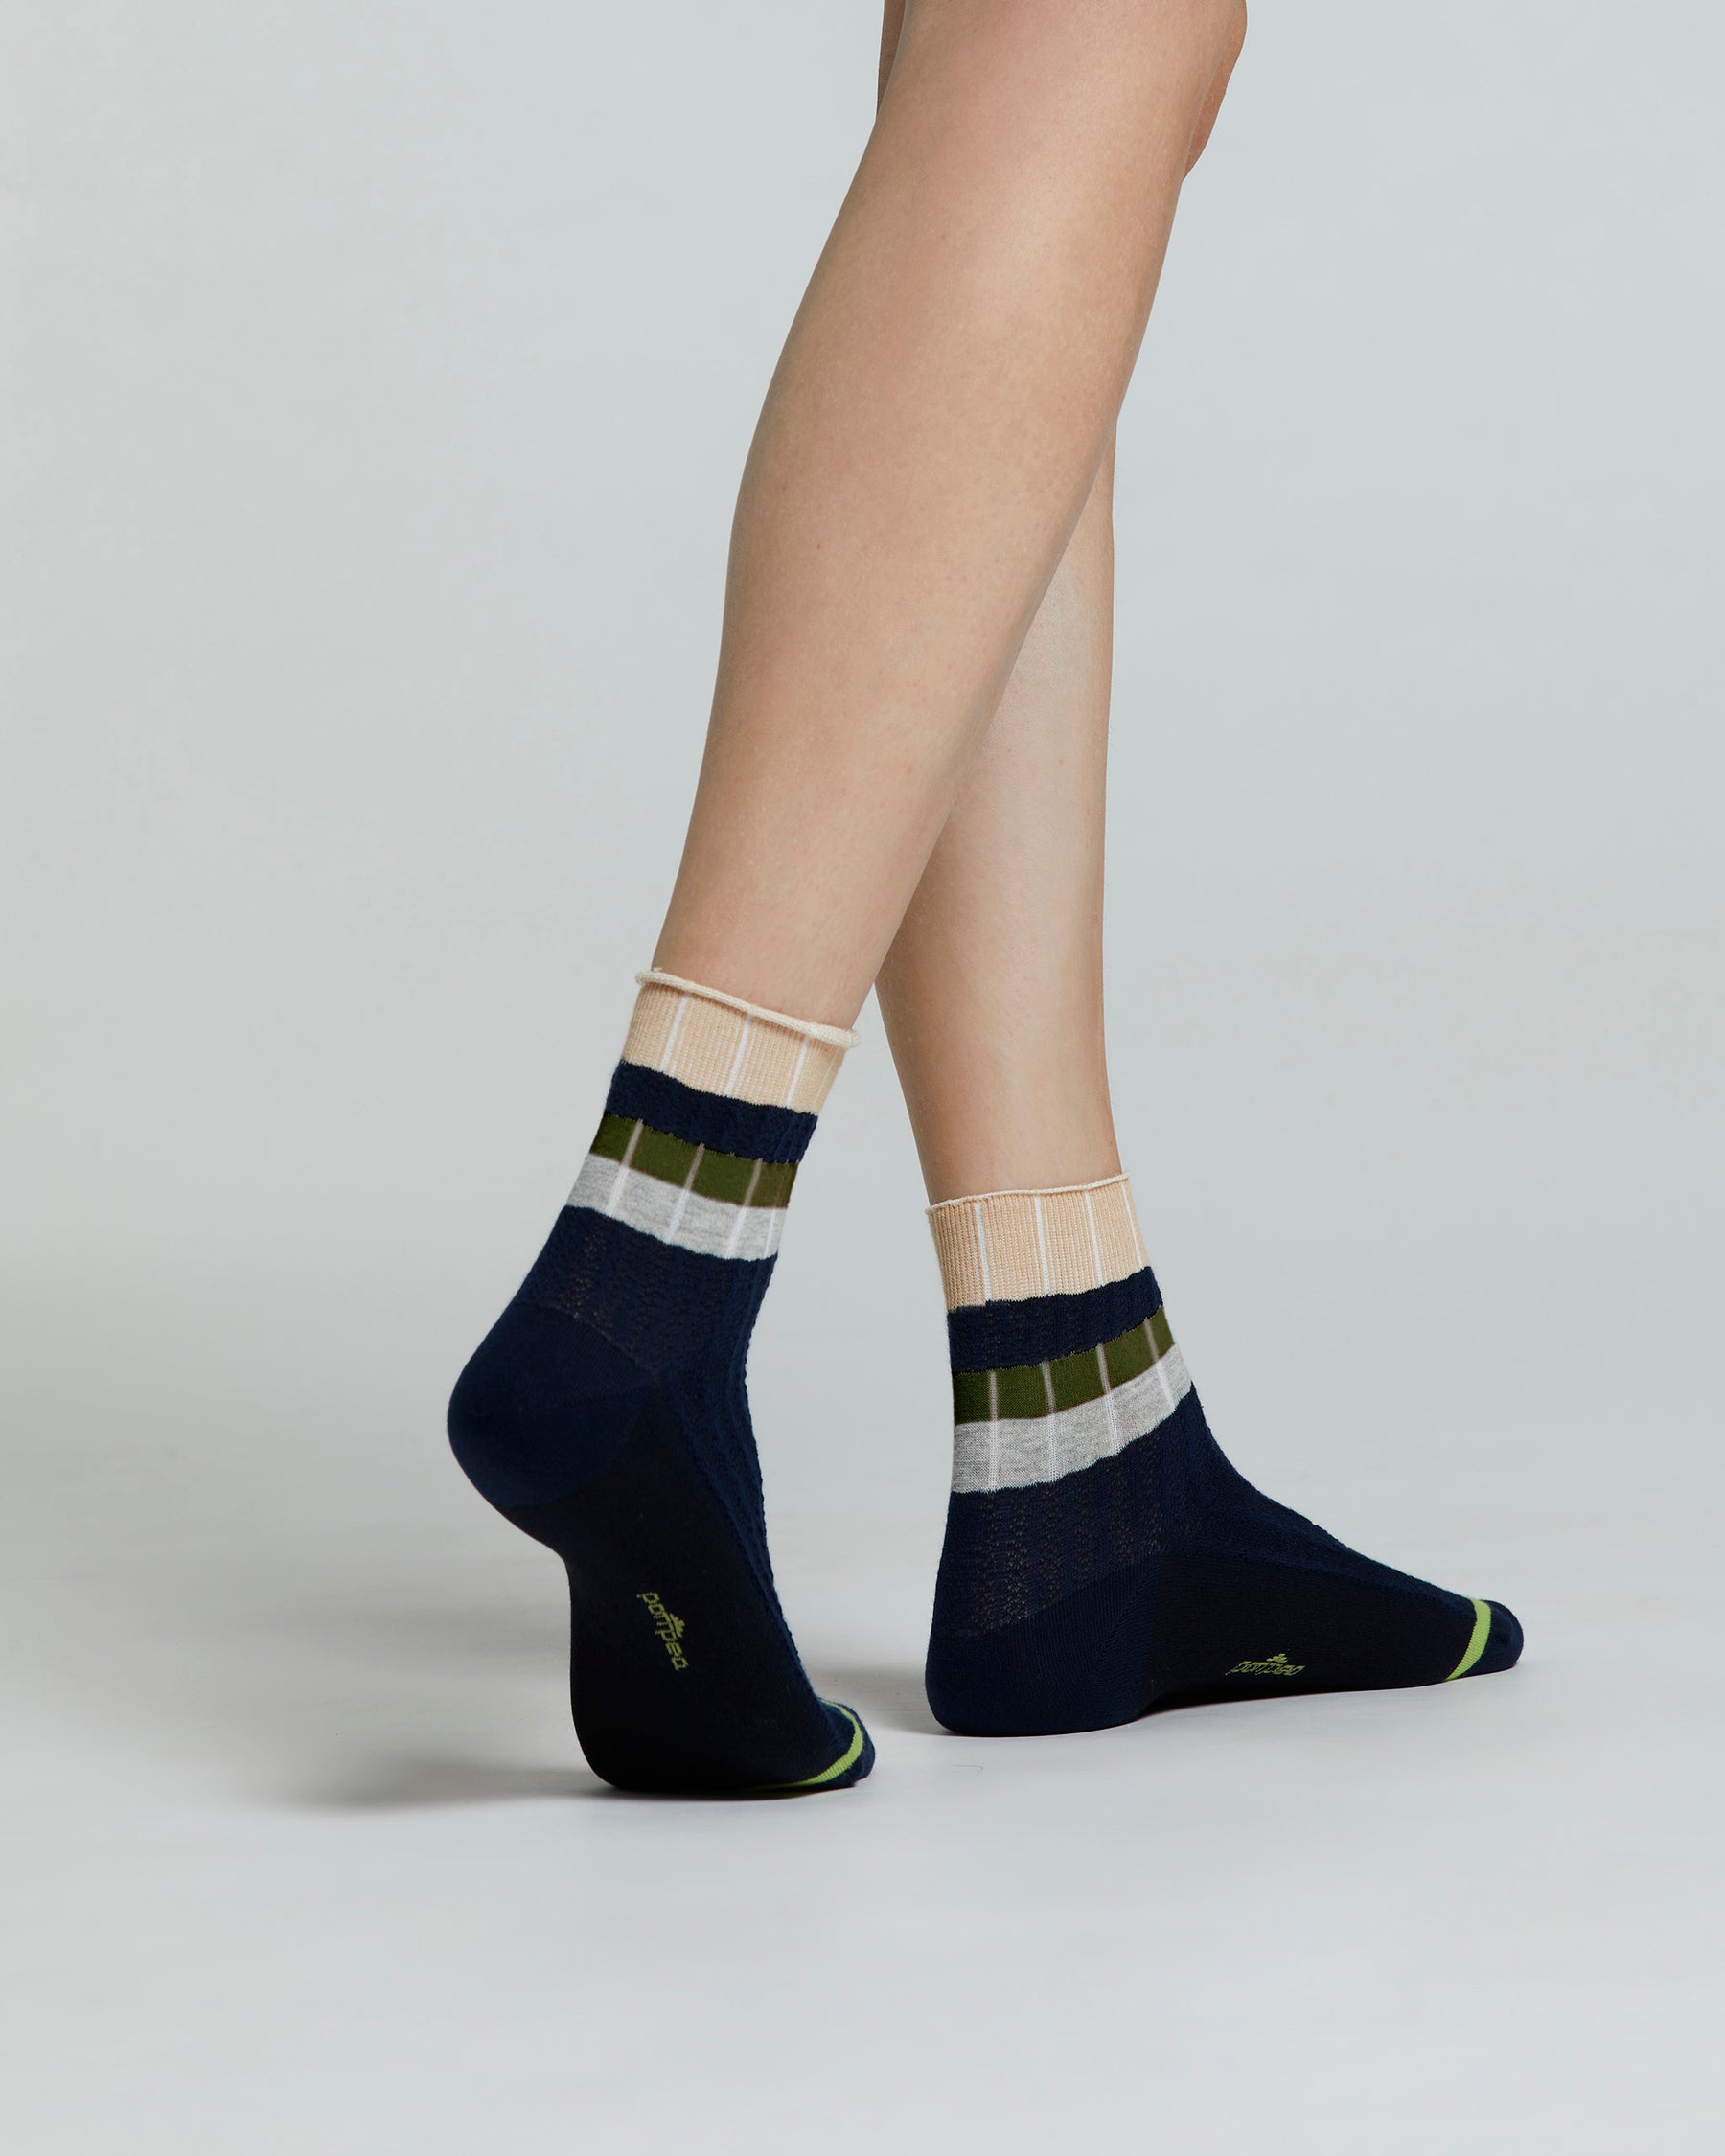 COTTON BEGONIA SOCK WITH CONTRASTING HORIZONTAL STRIPES